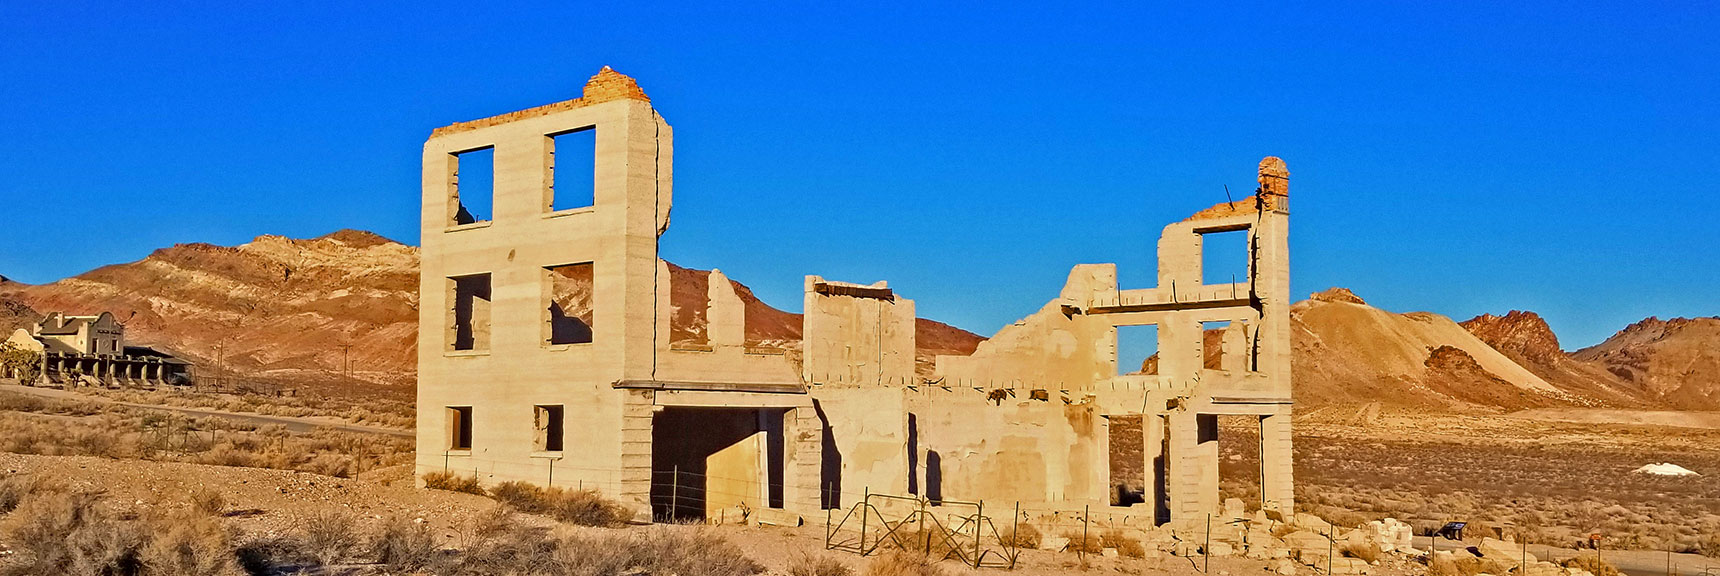 Cook Bank Building, Largest, Most Elaborate Building in Rhyolite | Rhyolite Ghost Town | Death Valley Area, Nevada